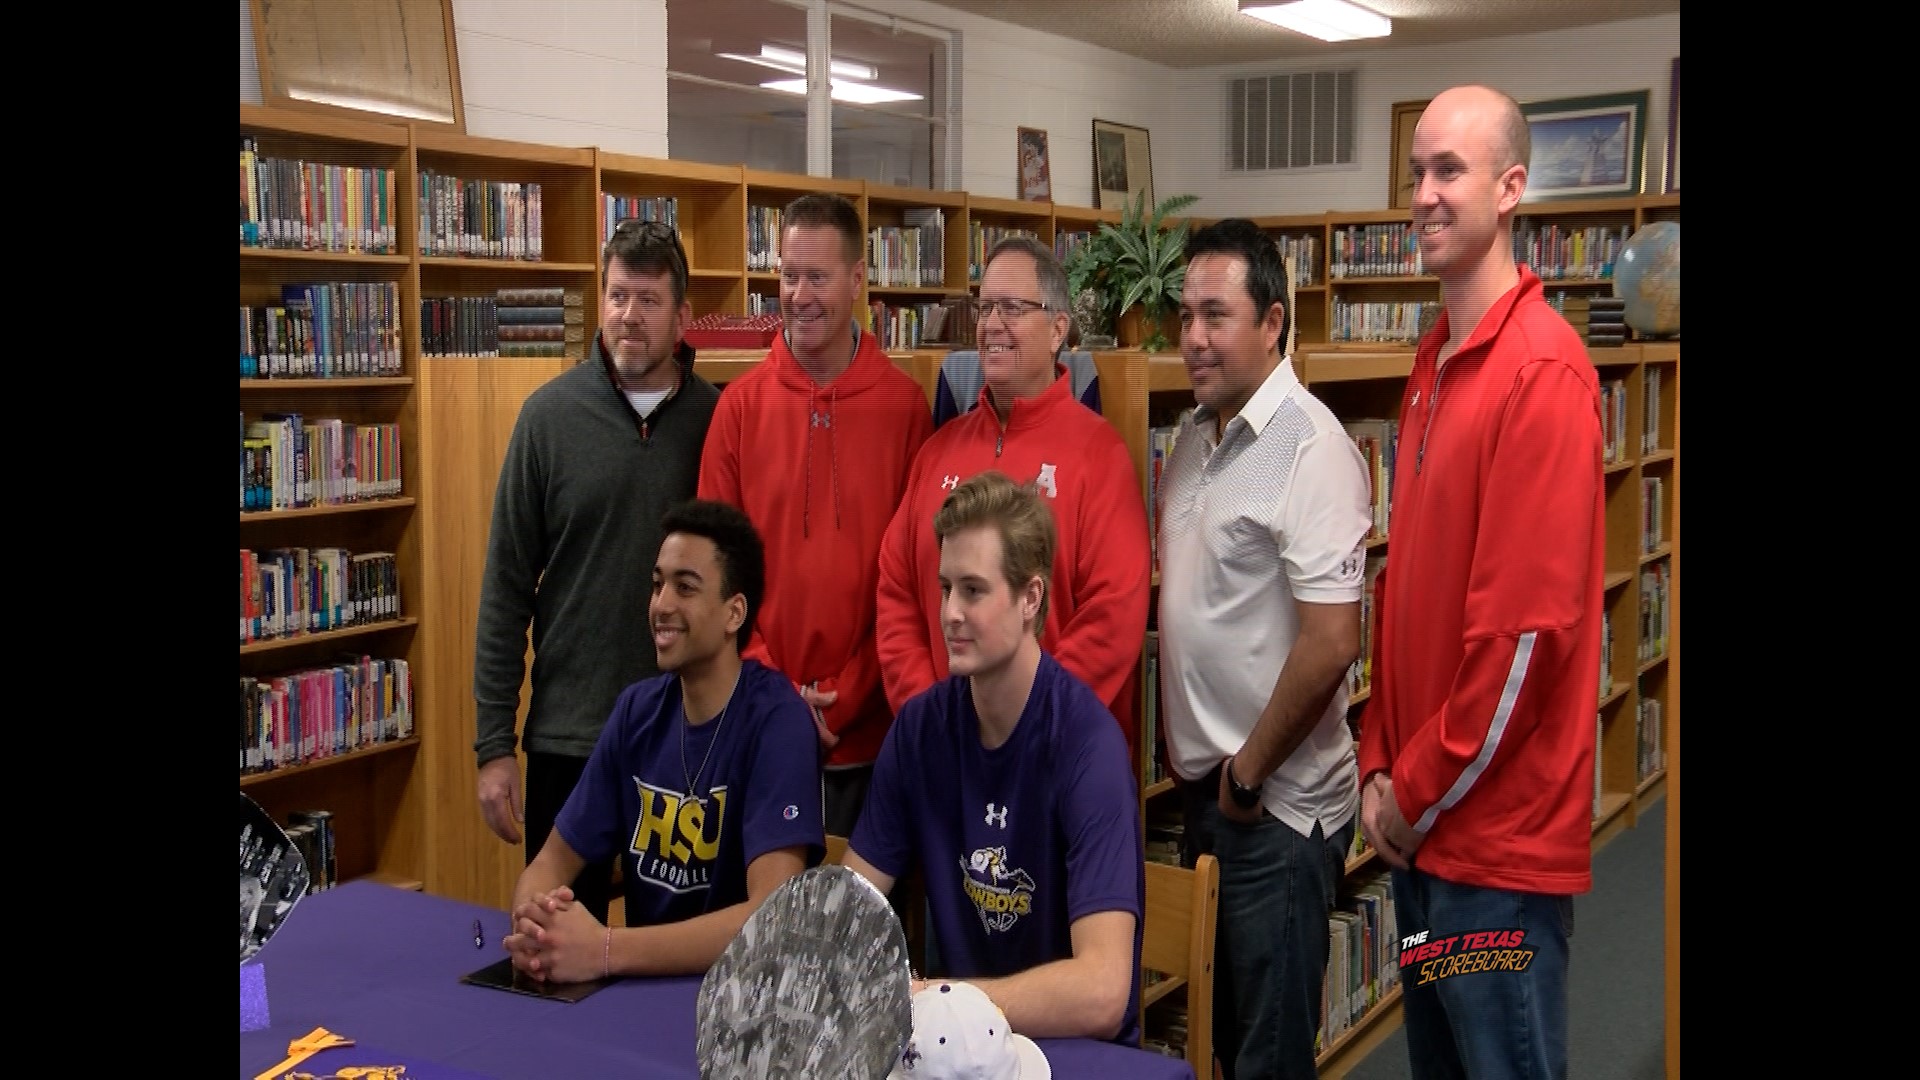 Albany's Ryan Hill and Cameron Dacus signed with Hardin-Simmons to continue their football careers. They celebrated with friends, teammates, family and the community of Albany.